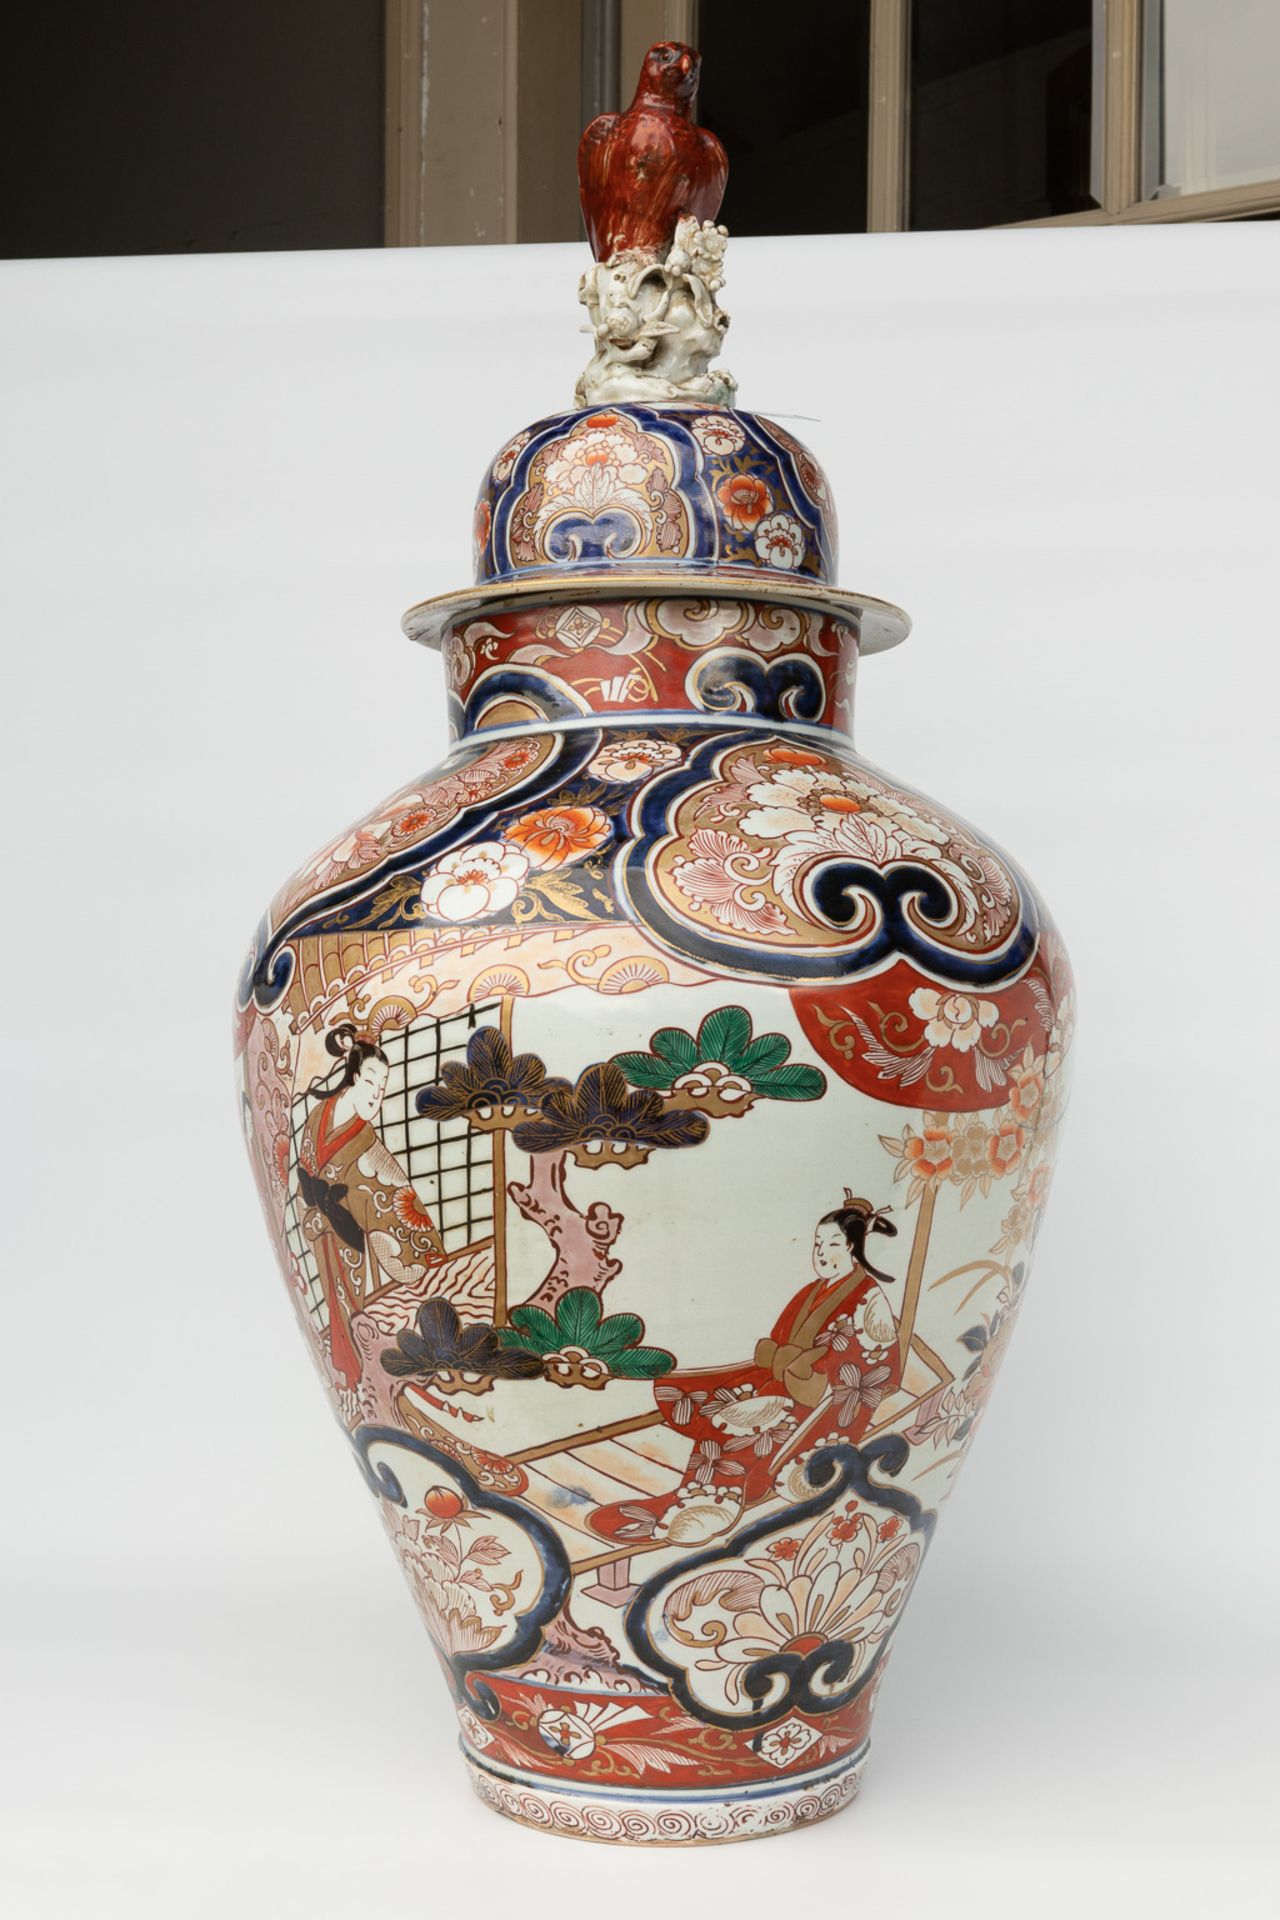 A large vase with lid made of Japanese porcelain in Imari - Image 15 of 16